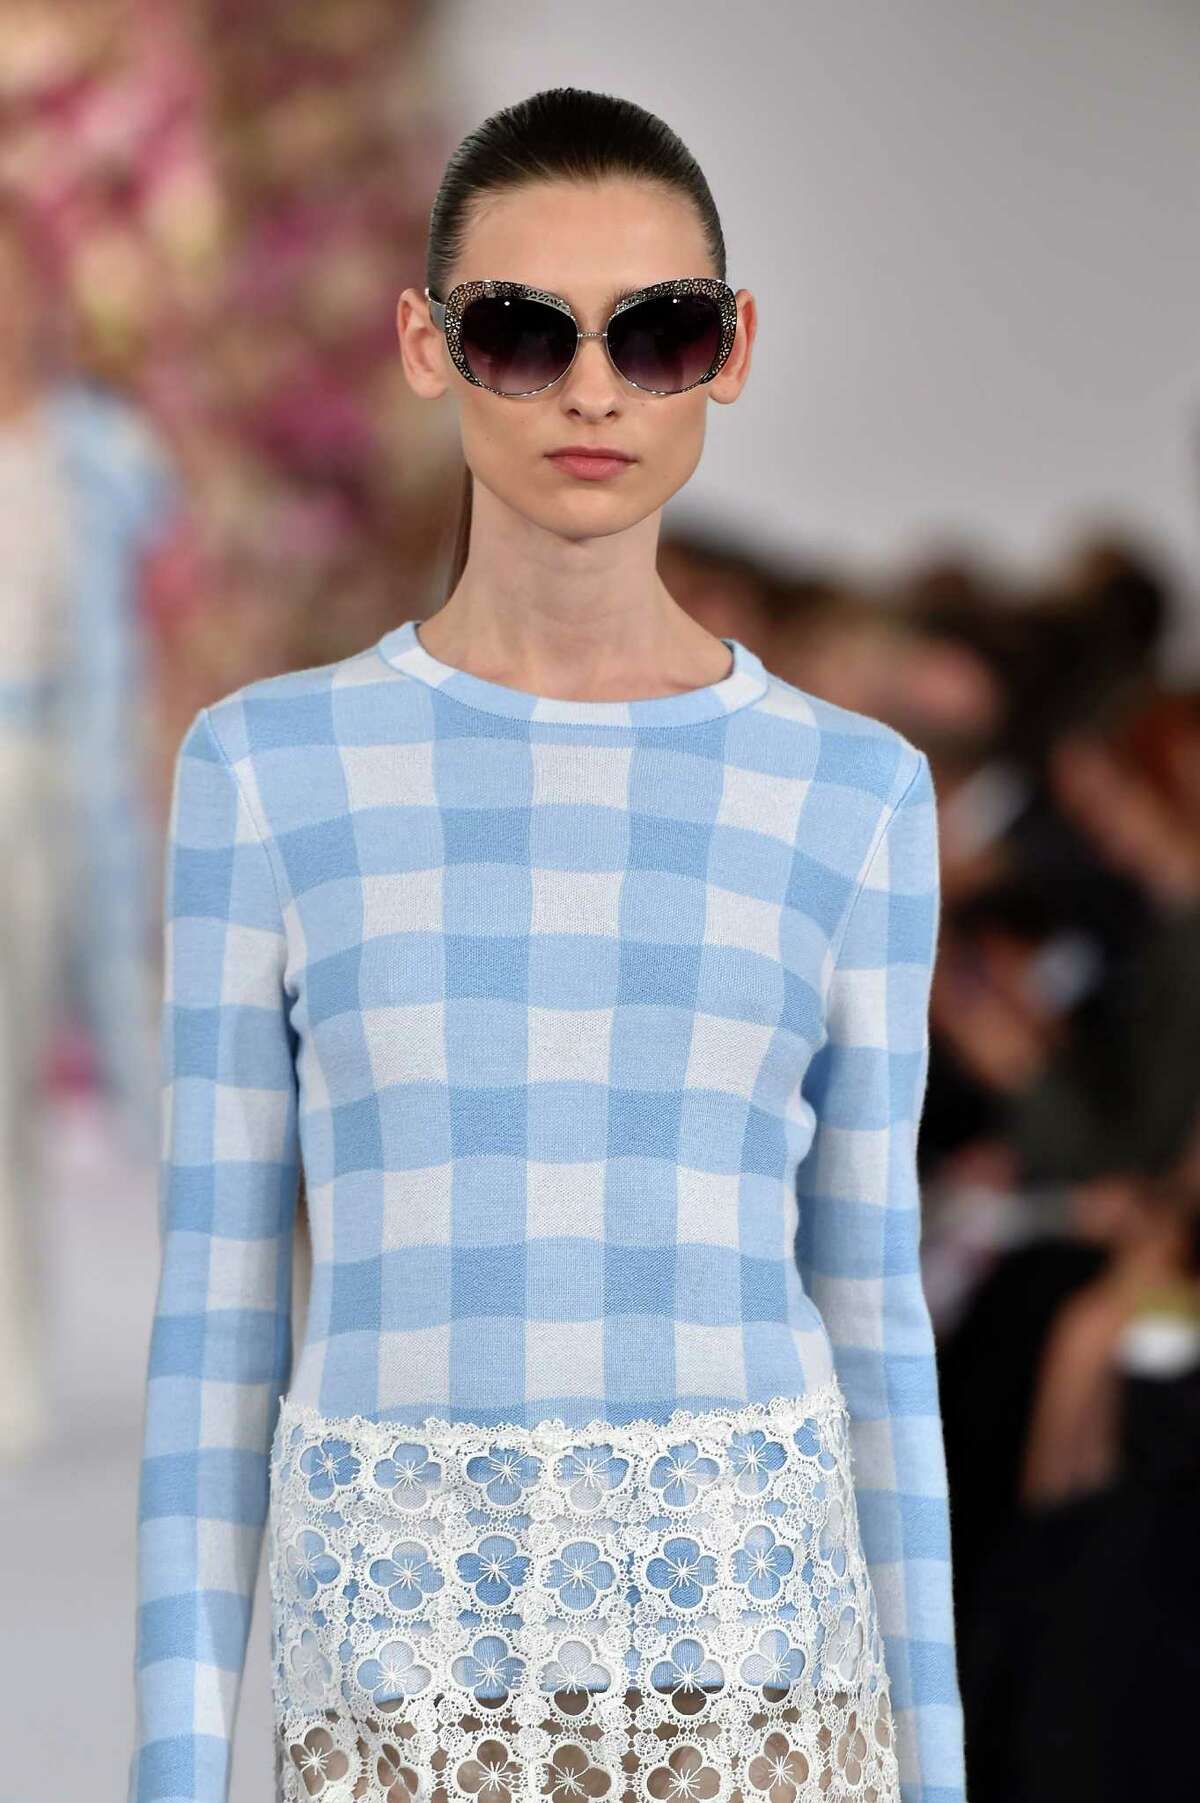 Gingham is predicted to be the print of the spring season in dresses, skirts, tops, jackets and long coats as seen in this look from Oscar de la Renta.